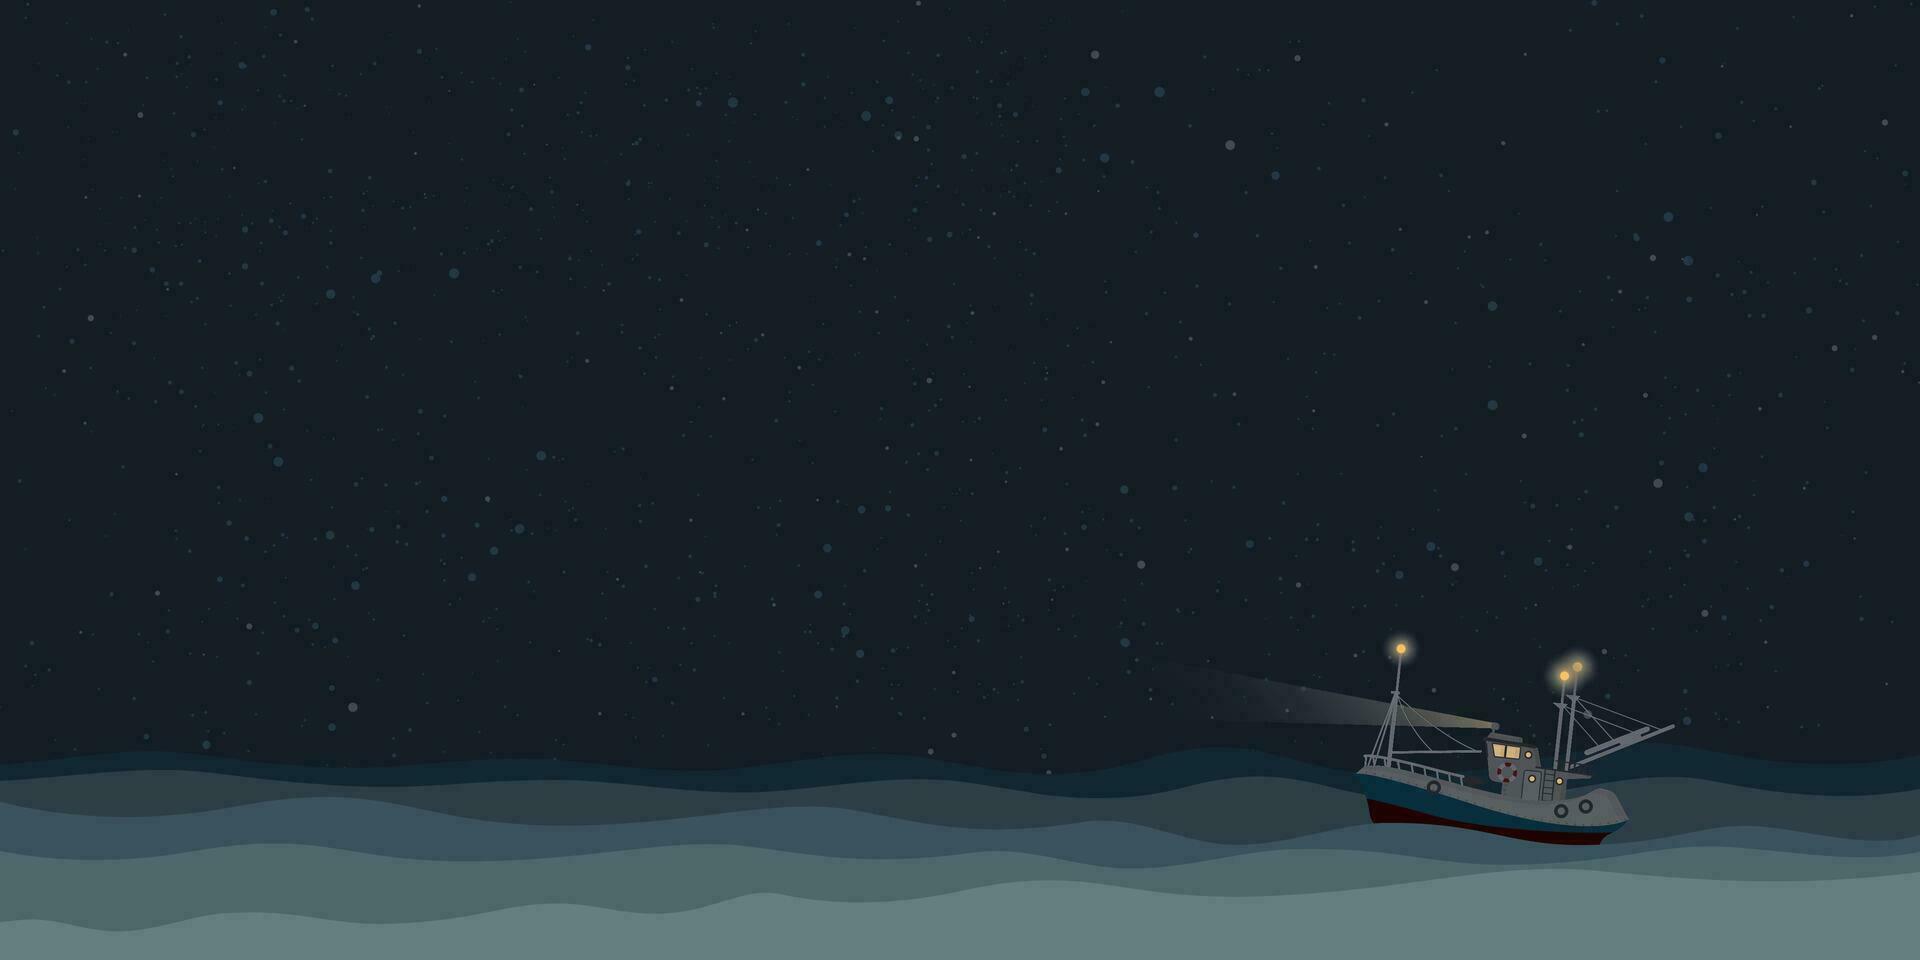 Fishing boat on the sea at night vector illustration. Ocean with ship, star and night sky background.